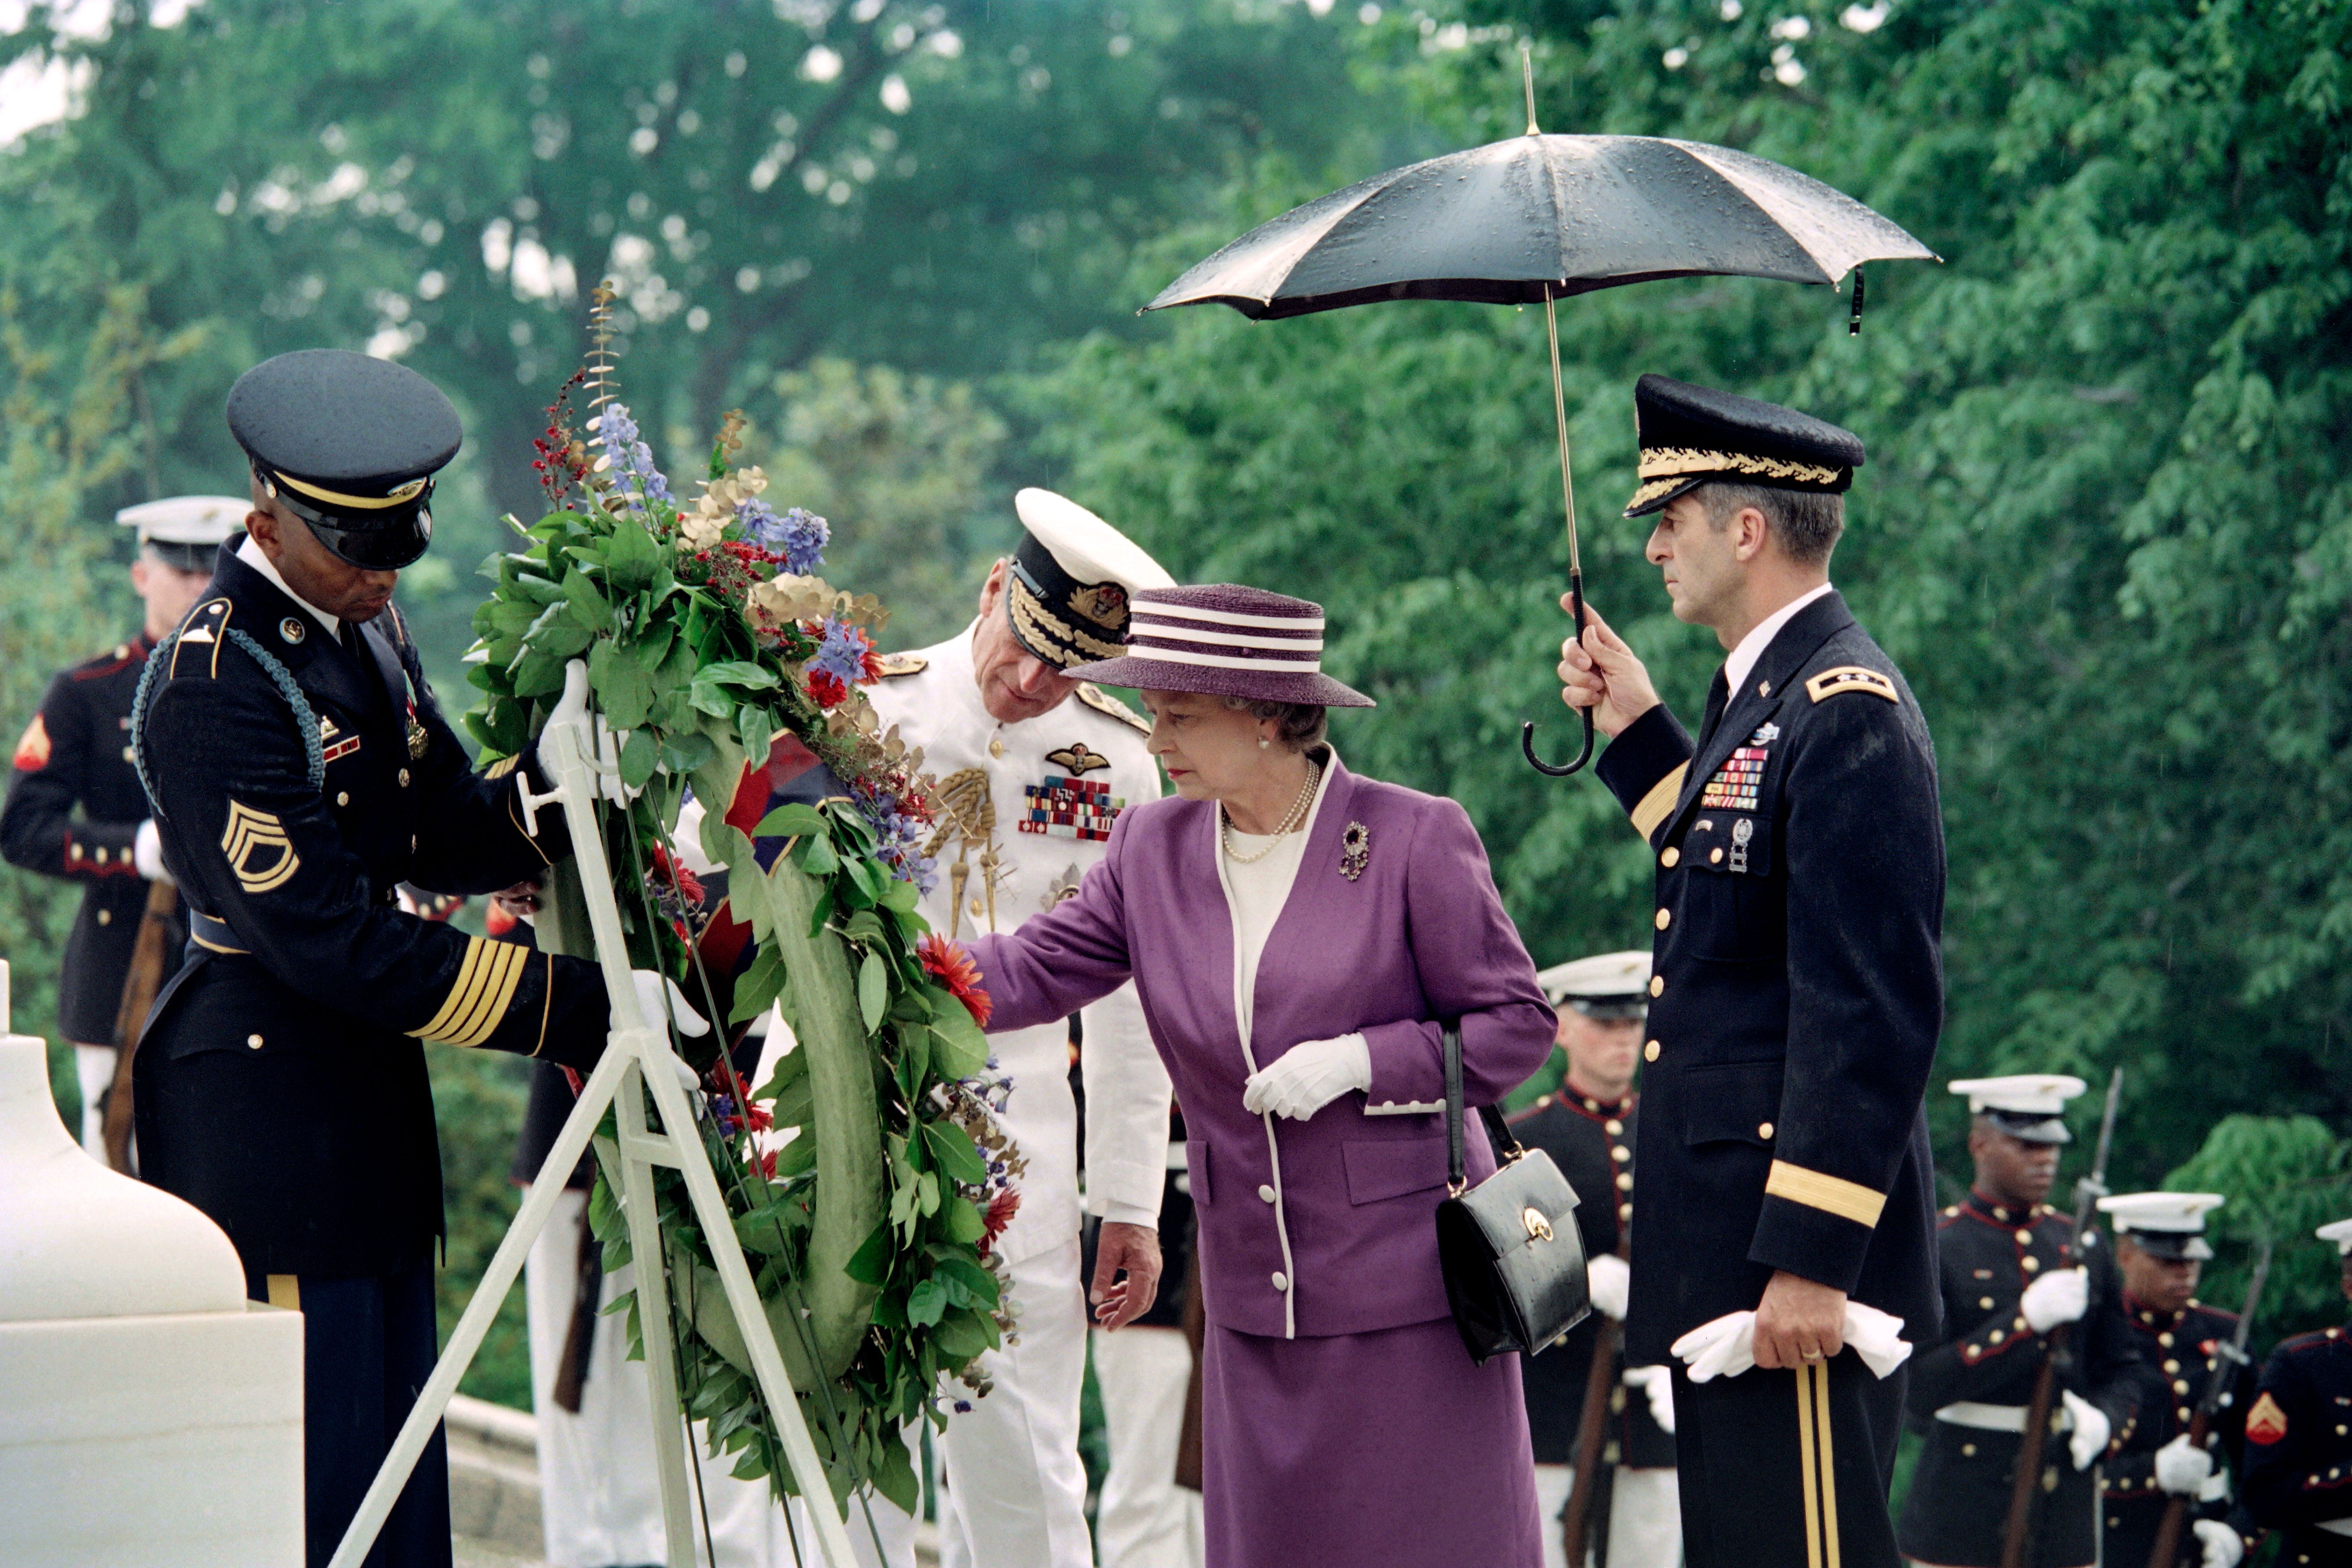 Britain's Queen Elizabeth II (R) lays a wreath at the Tomb of the Unknown Soldier on May 14, 1991 at Arlington National Cemetery, as Prince Philip, Duke of Edinburgh (C) looks on.